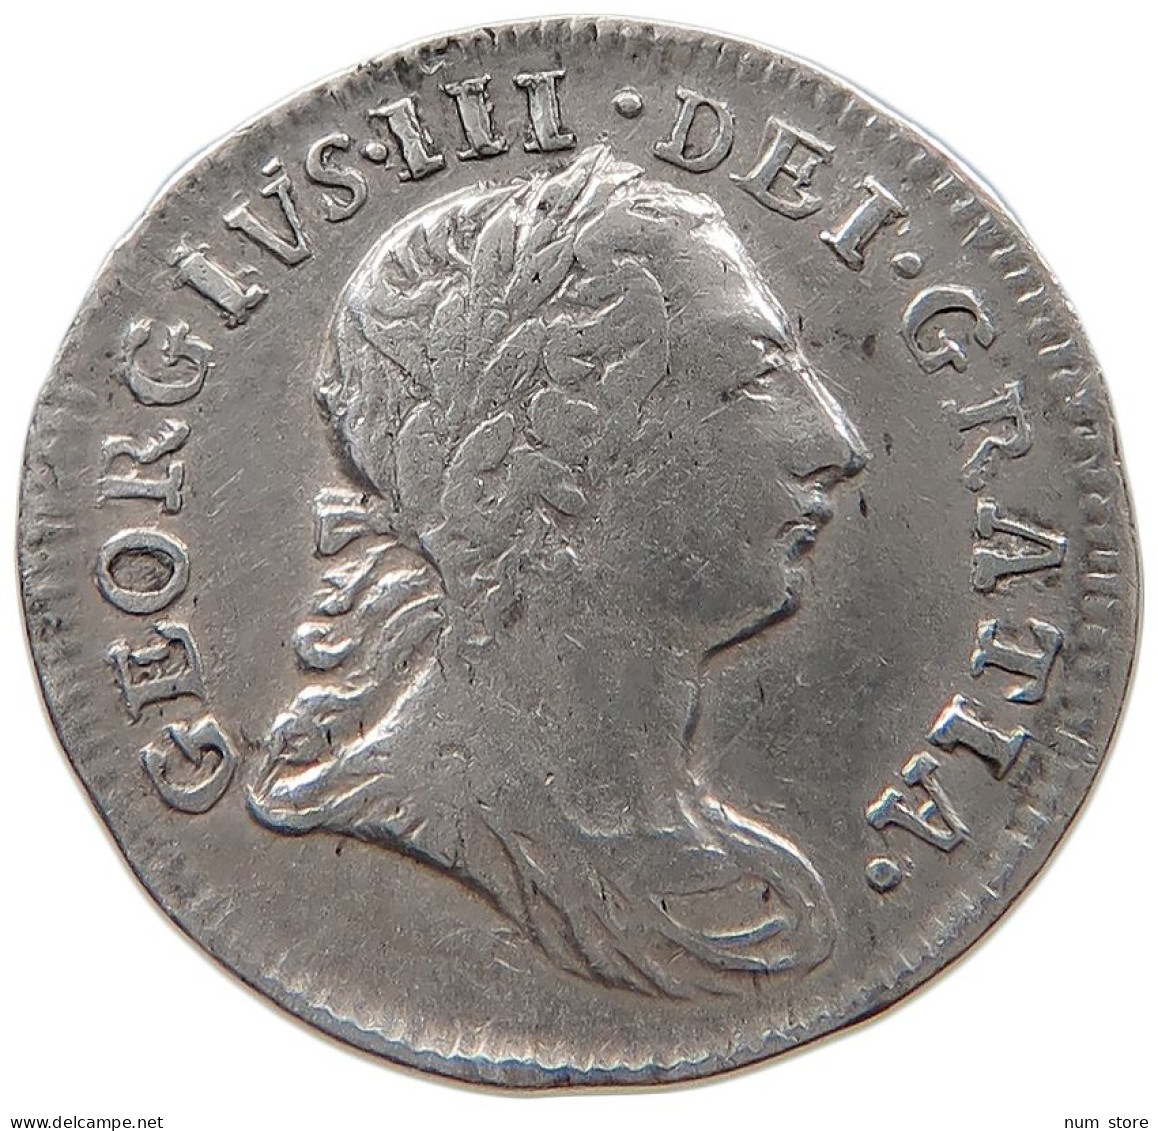 GREAT BRITAIN TWOPENCE MAUNDY 1772 GEORGE III. 1760-1820 #t143 0651 - D. 2 Pence